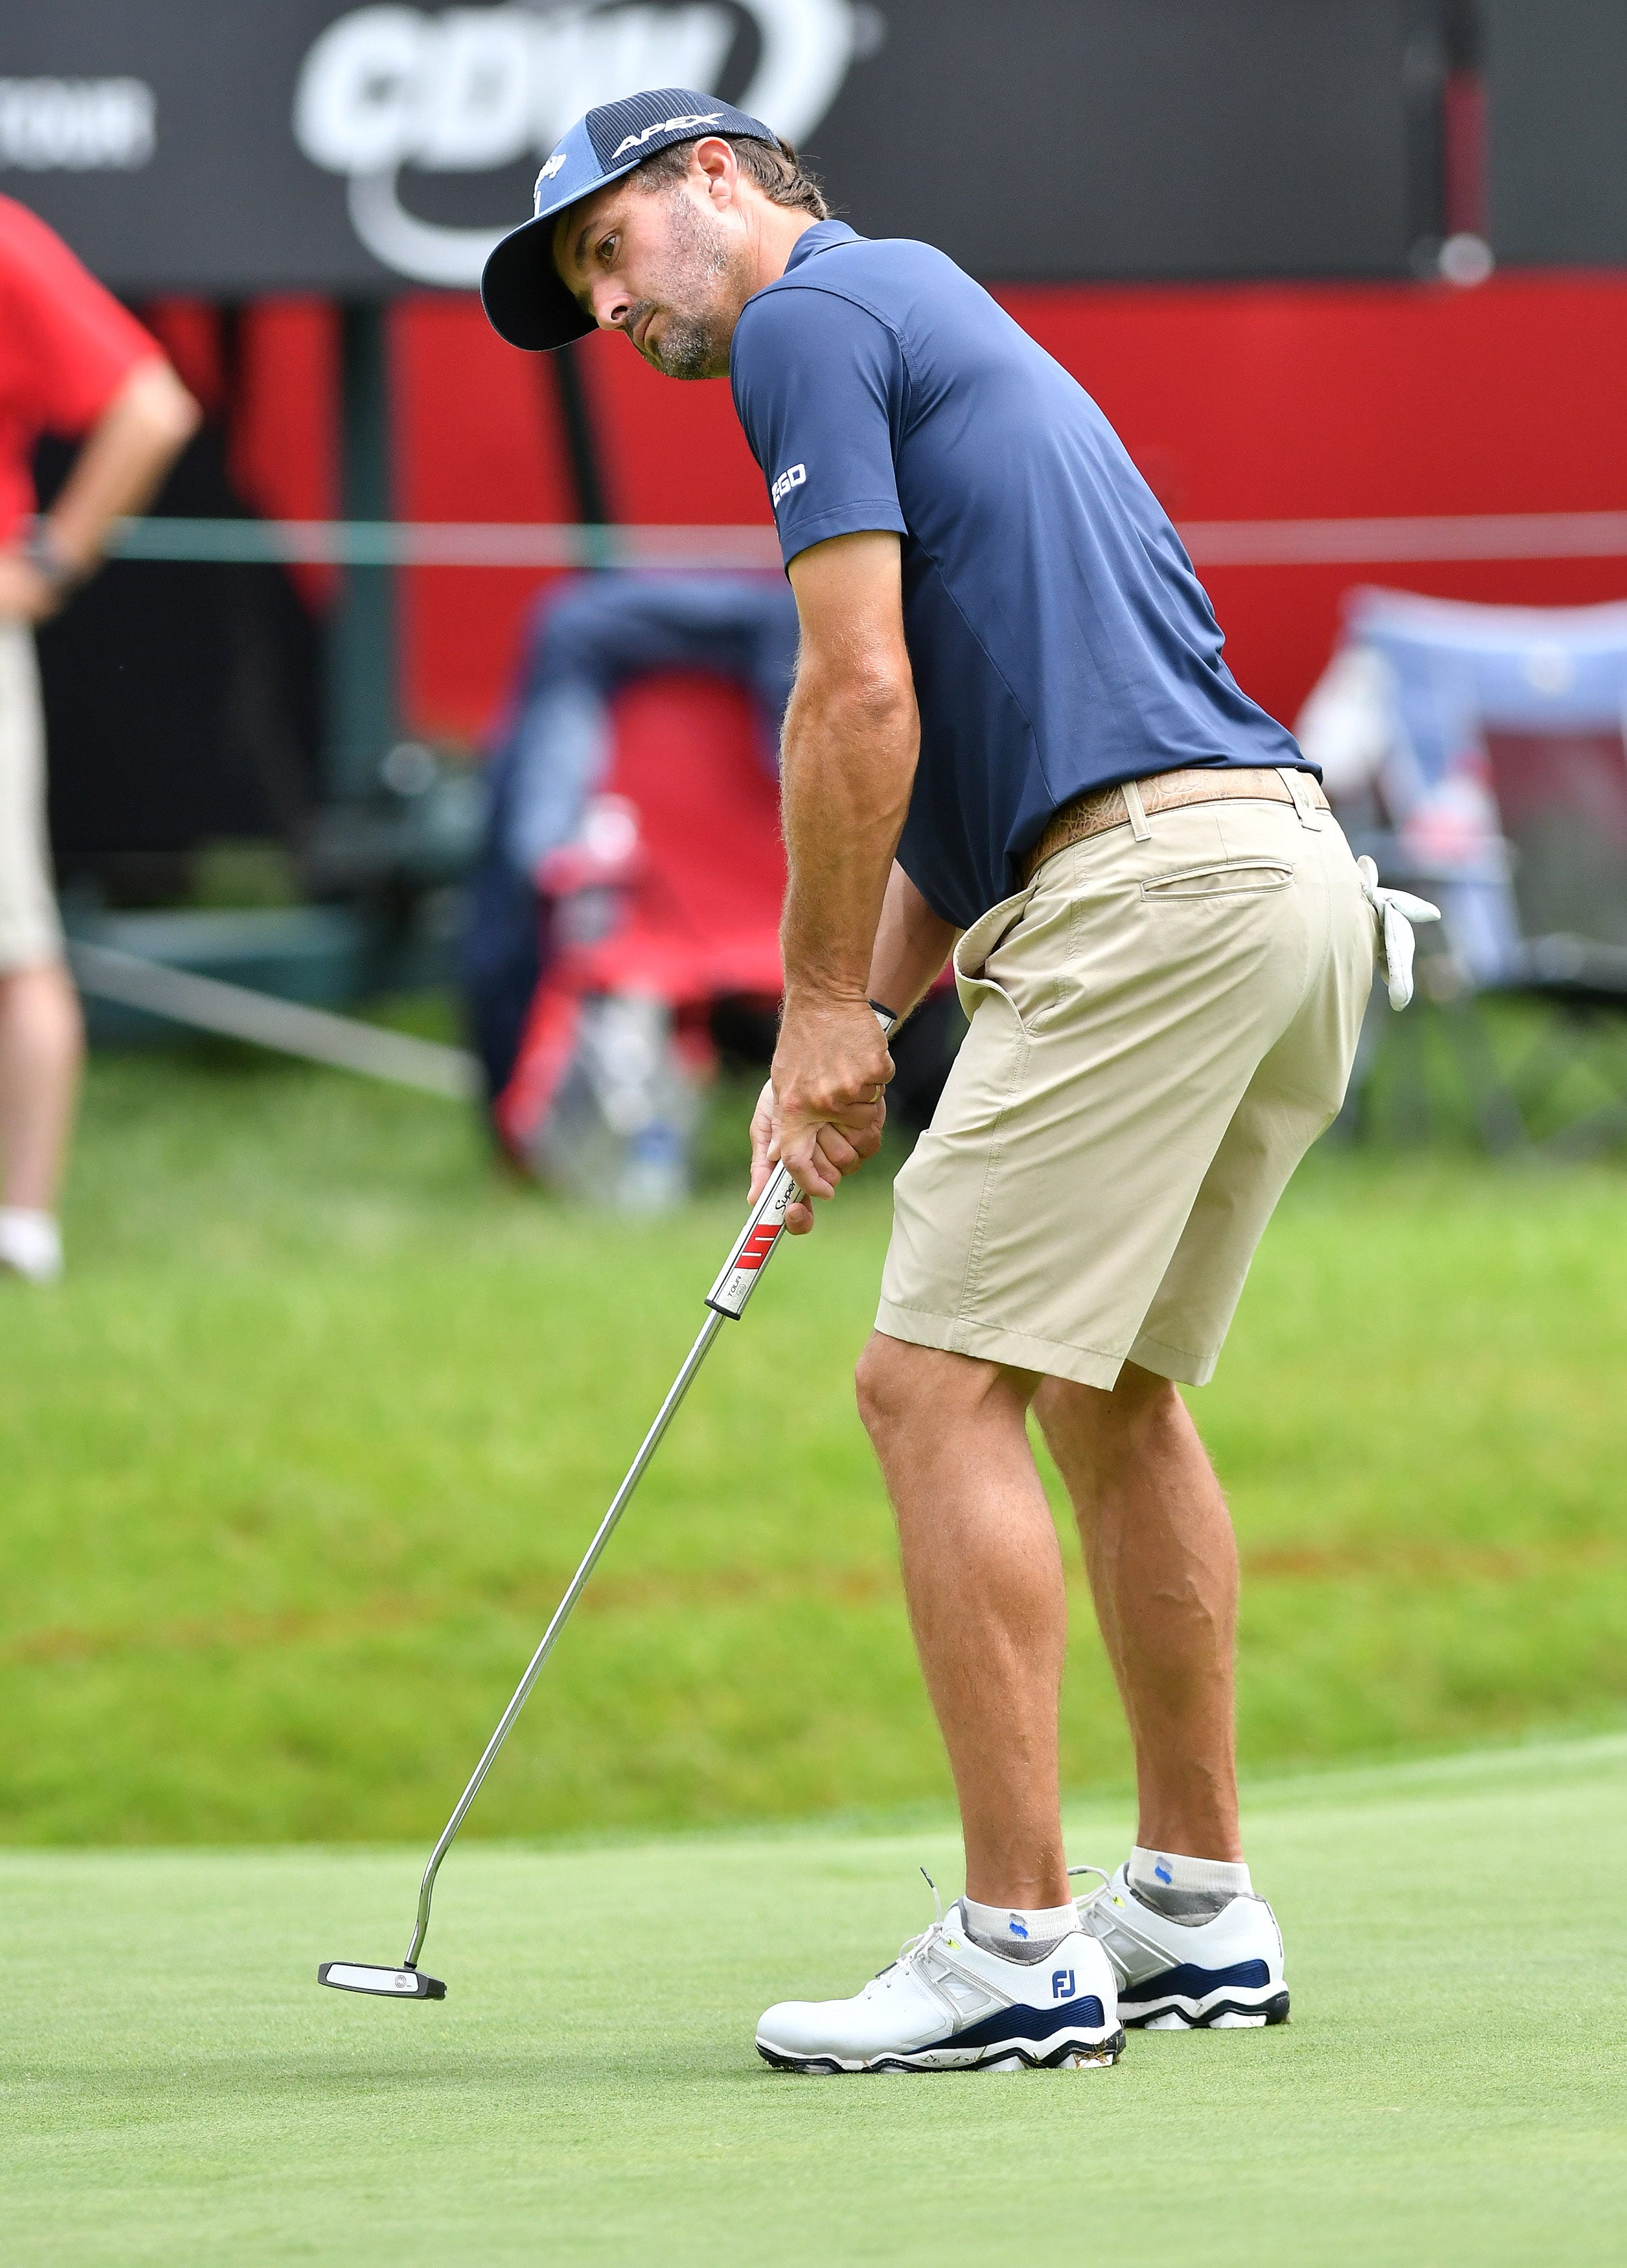 Kevin Kisner putts on the 18th green.